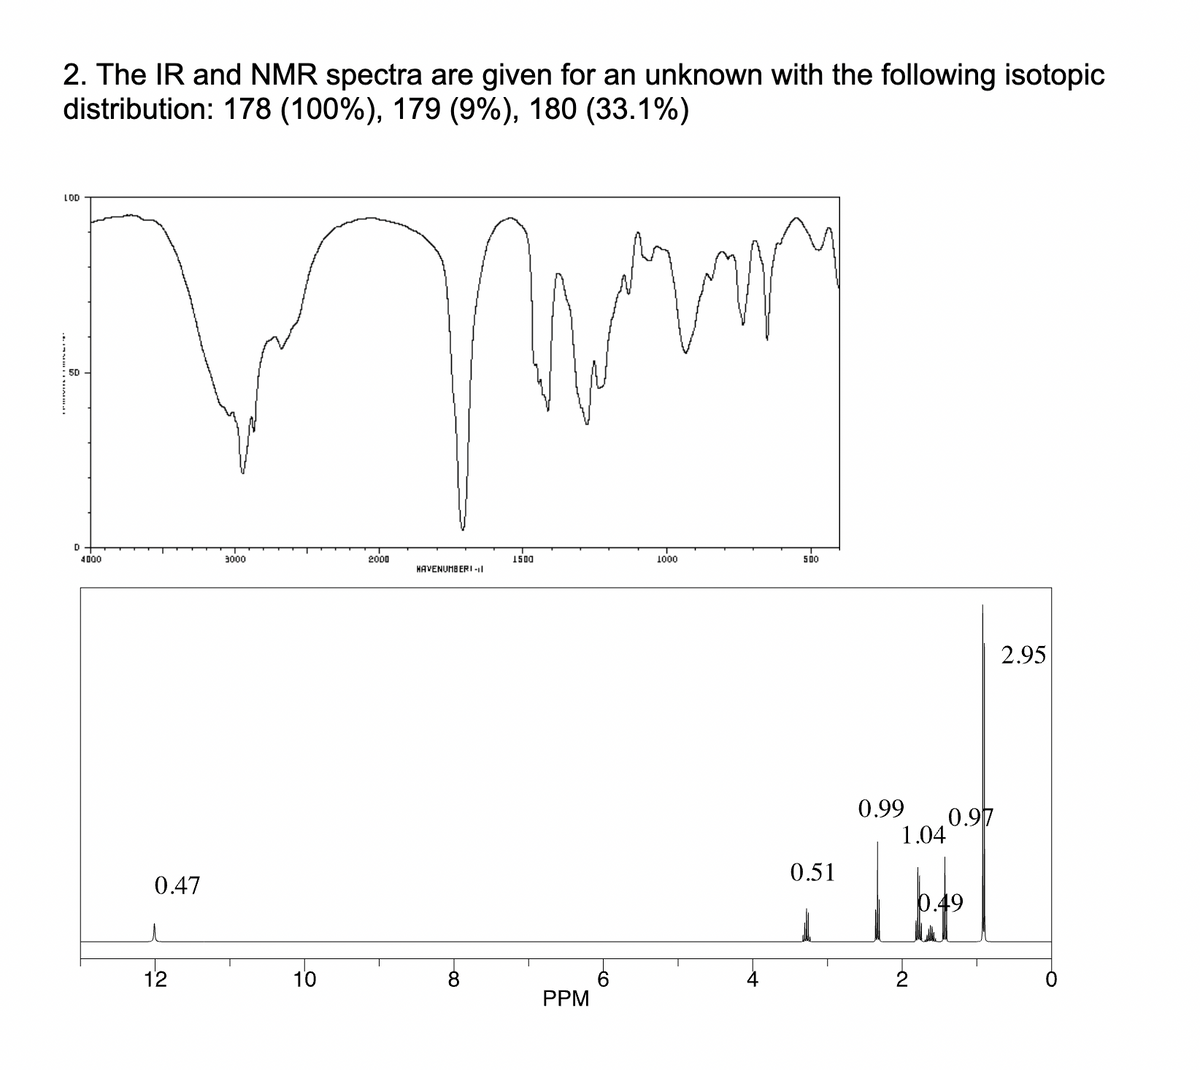 2. The IR and NMR spectra are given for an unknown with the following isotopic
distribution: 178 (100%) , 179 (9%), 180 (33.1%)
LOD
5D
D
mumm
4000
0.47
12
3000
10
2000
HAVENUMBERI-I
8
1500
PPM
1000
500
0.51
0.99
1.04
0.97
0.49
2.95